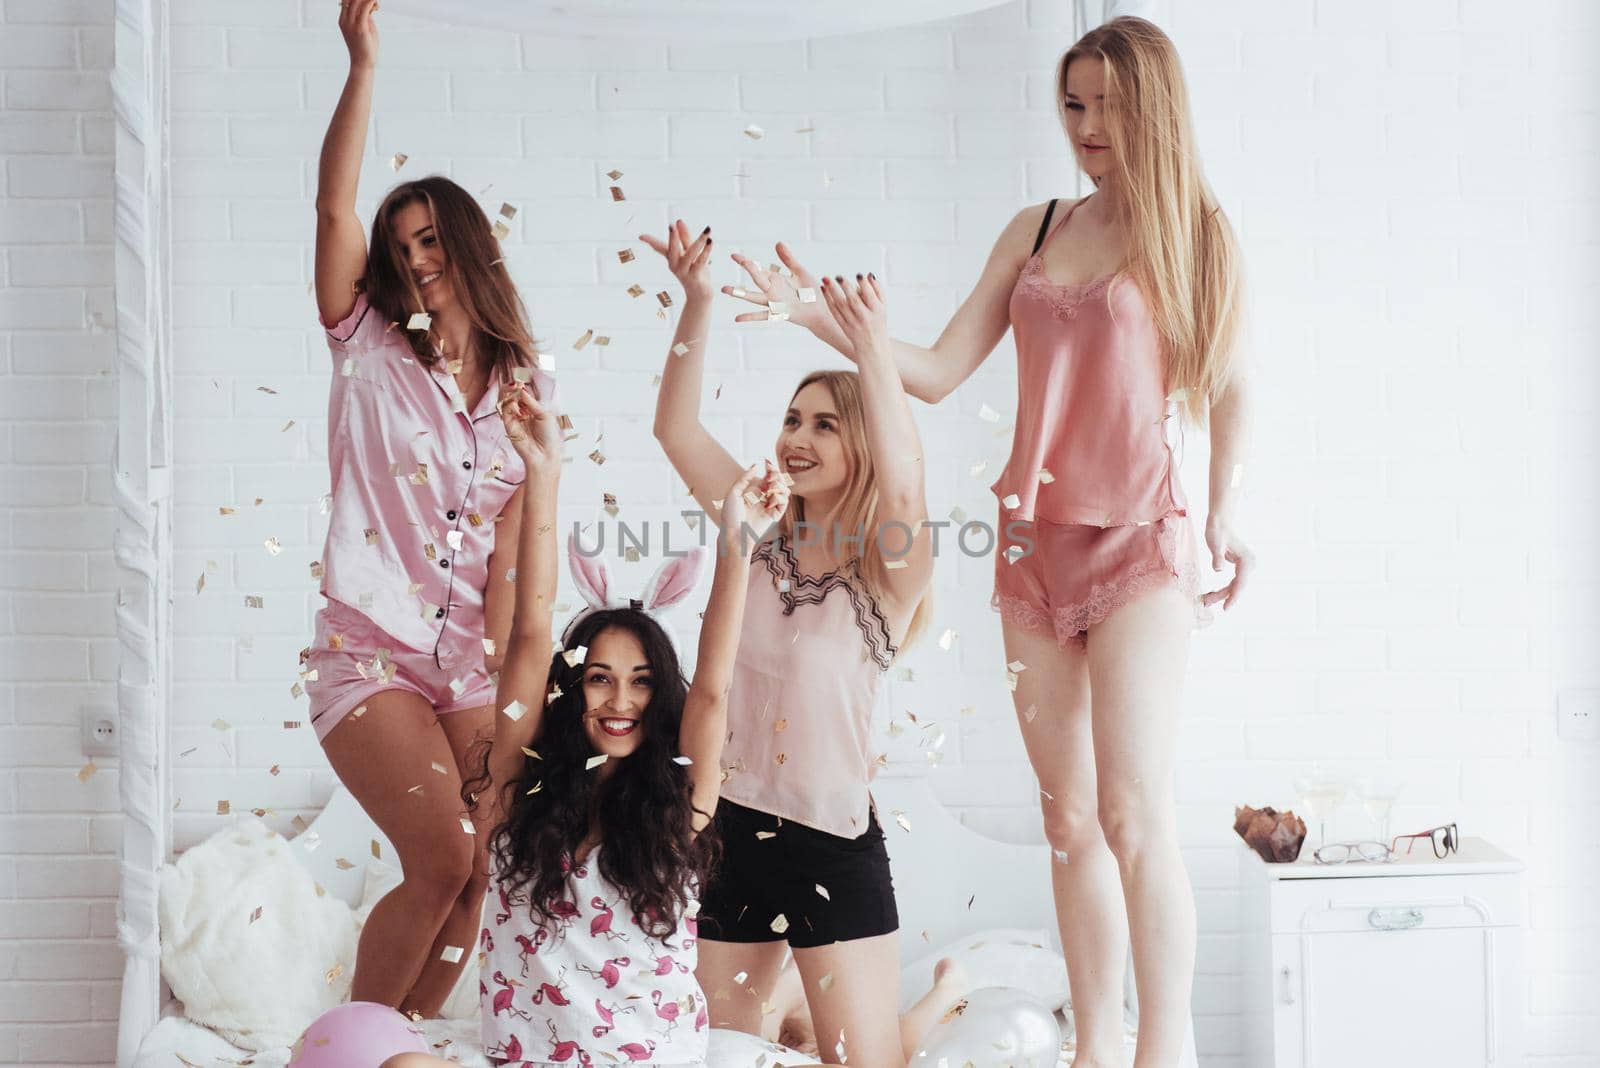 Hands up. Confetti in the air. Young girls have fun on the white bed in nice room.